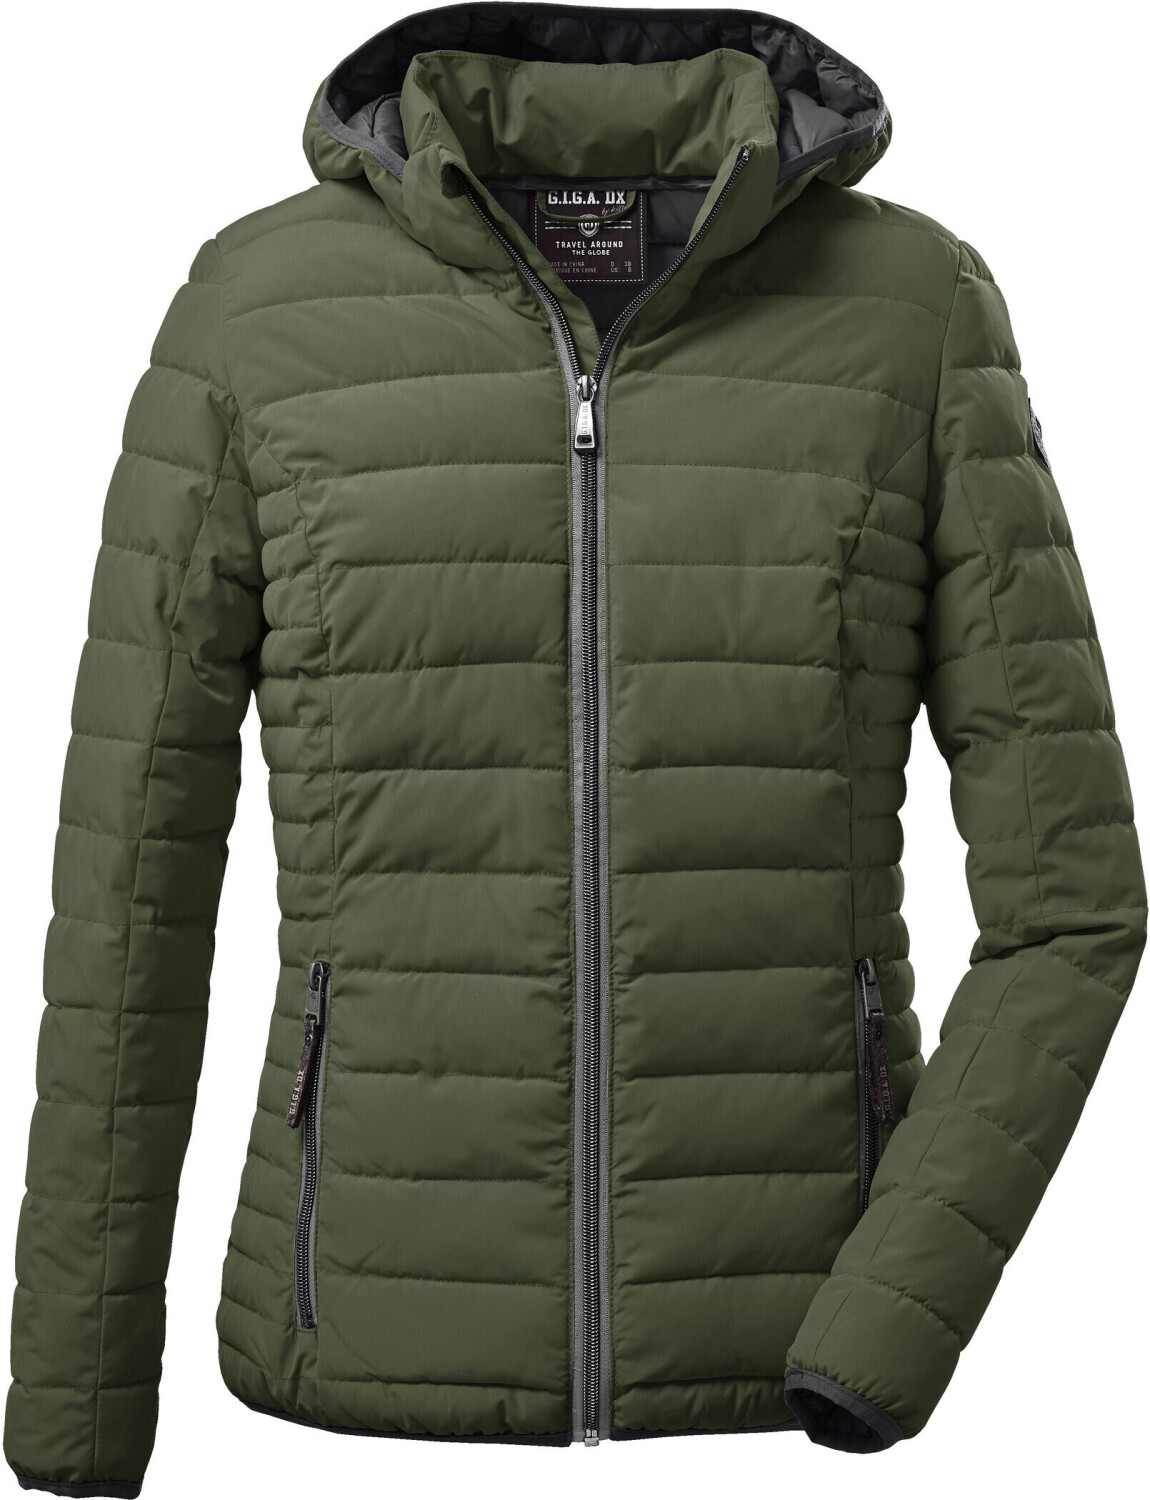 Buy Killtec Ventoso (Today) on from £43.52 Best Jacket Deals – Quilted D Wmn